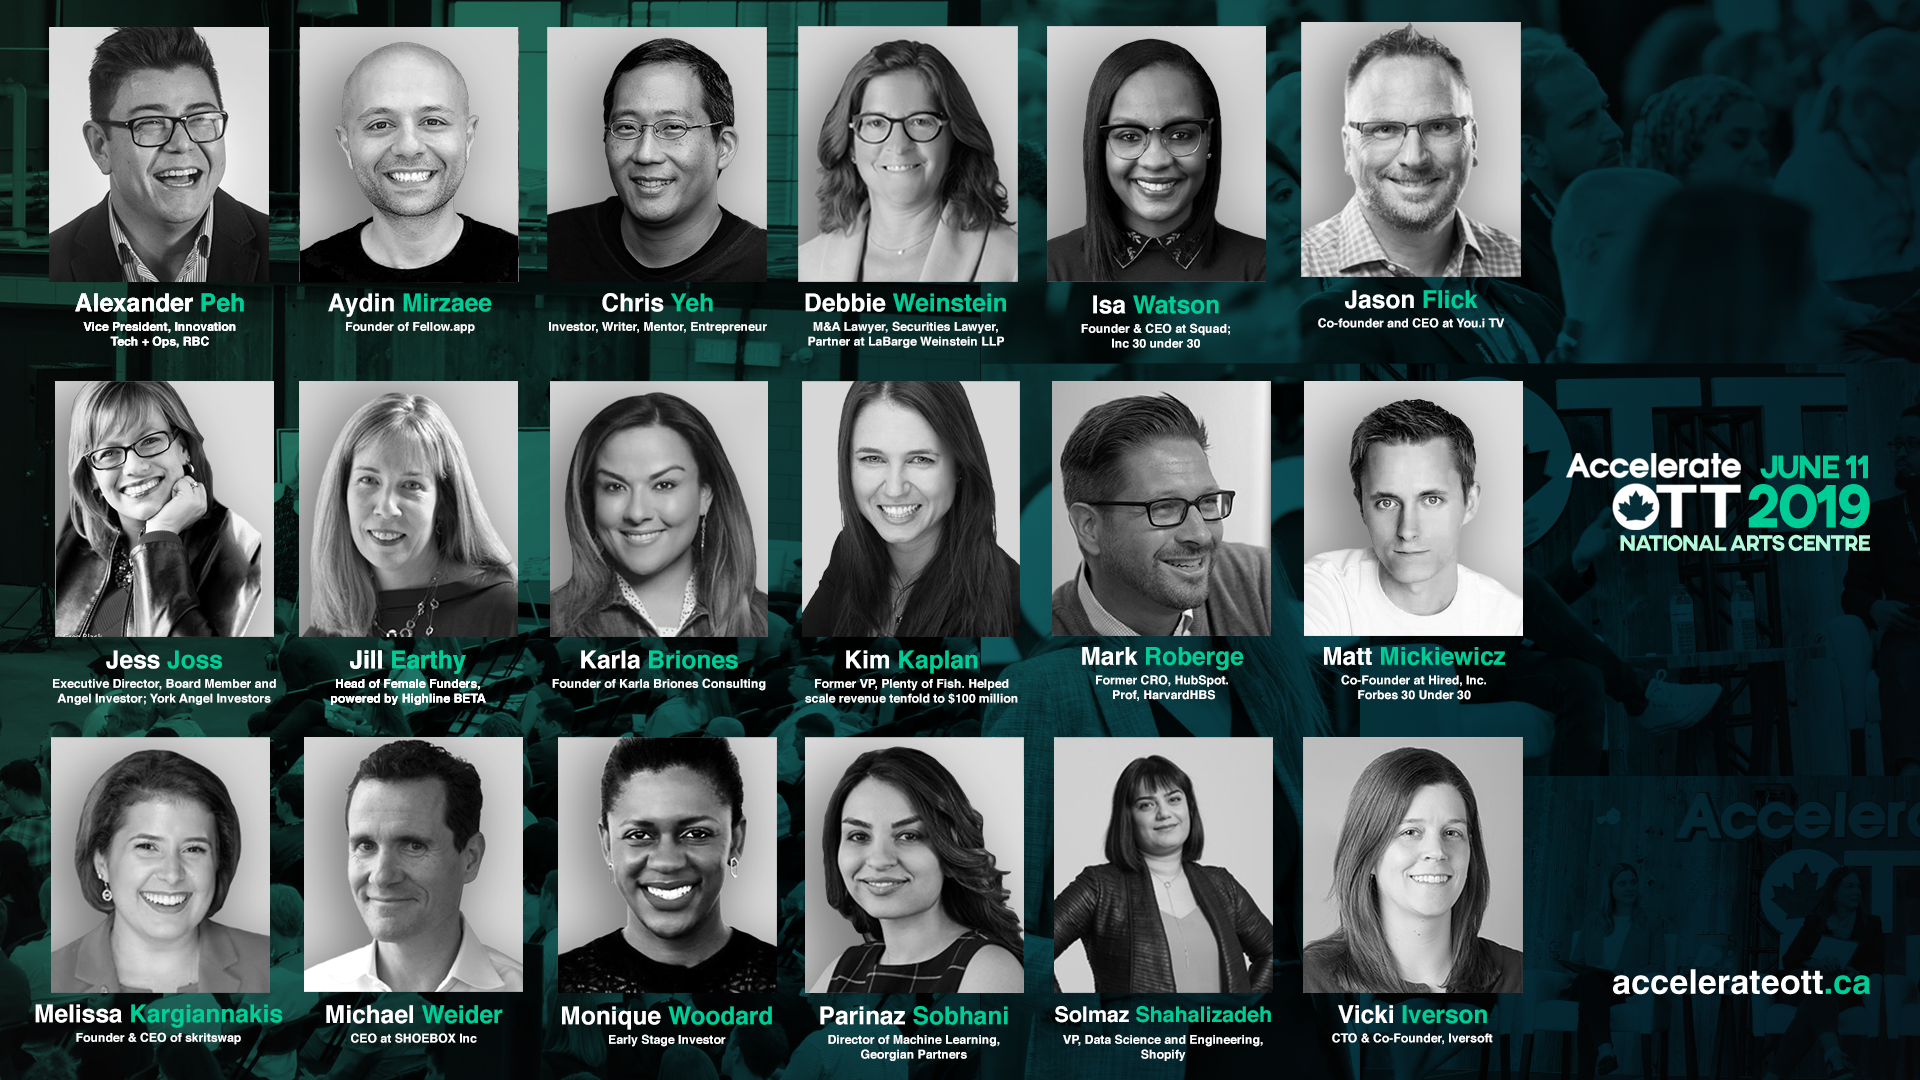 18 head shot photos of tech professionals with their names, and titles, displayed on a black and turquoise background graphic promoting AccelerateOTT 